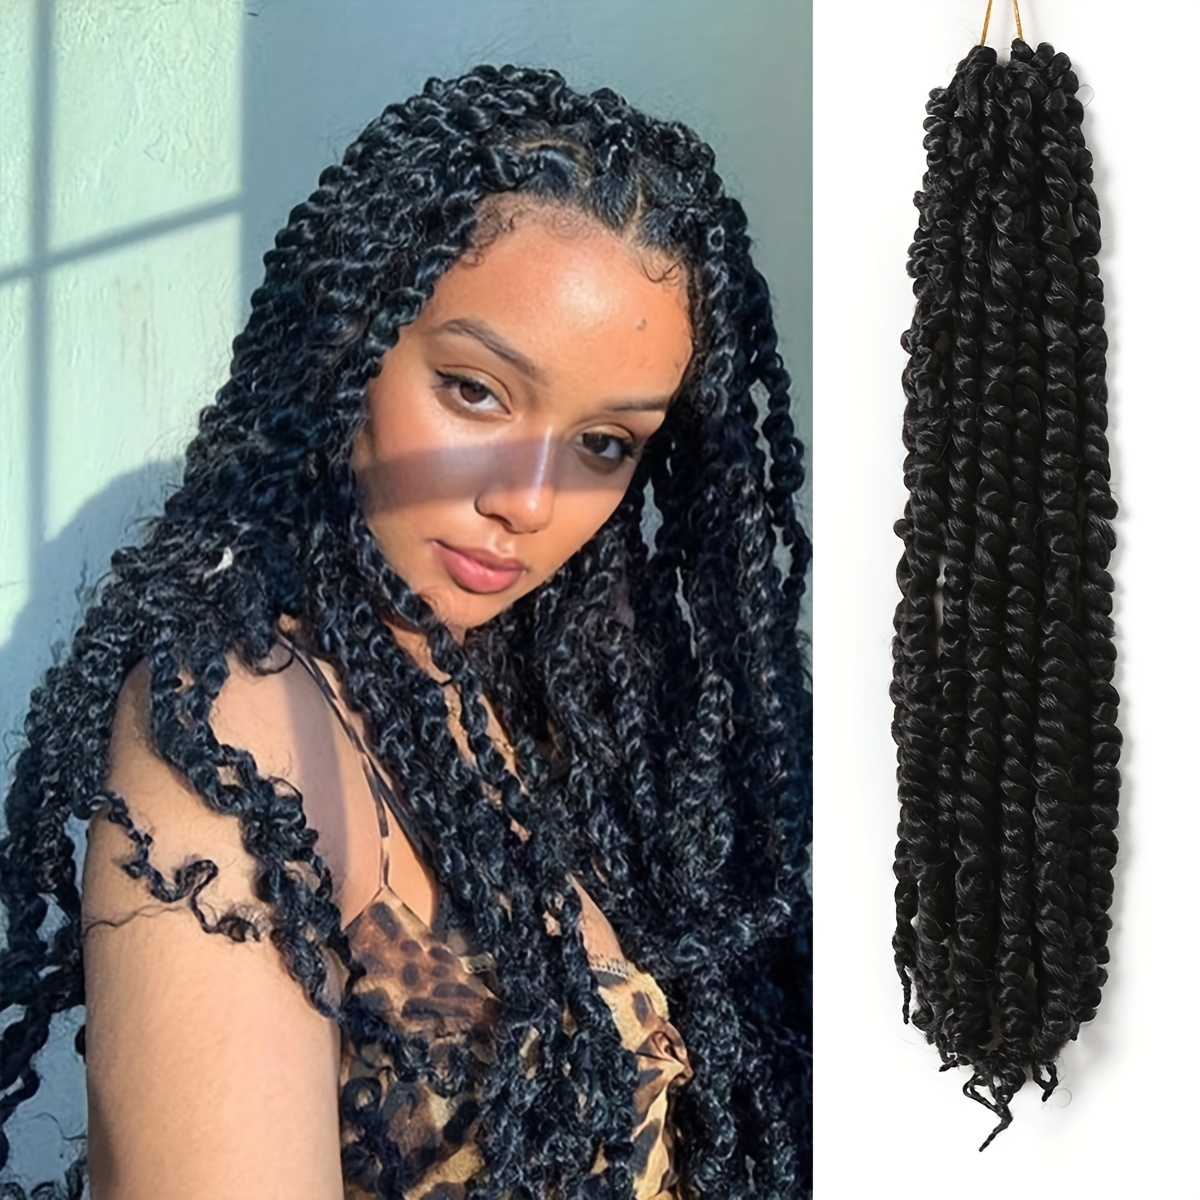 How To: Knotless Crochet Braids with Straight Hair